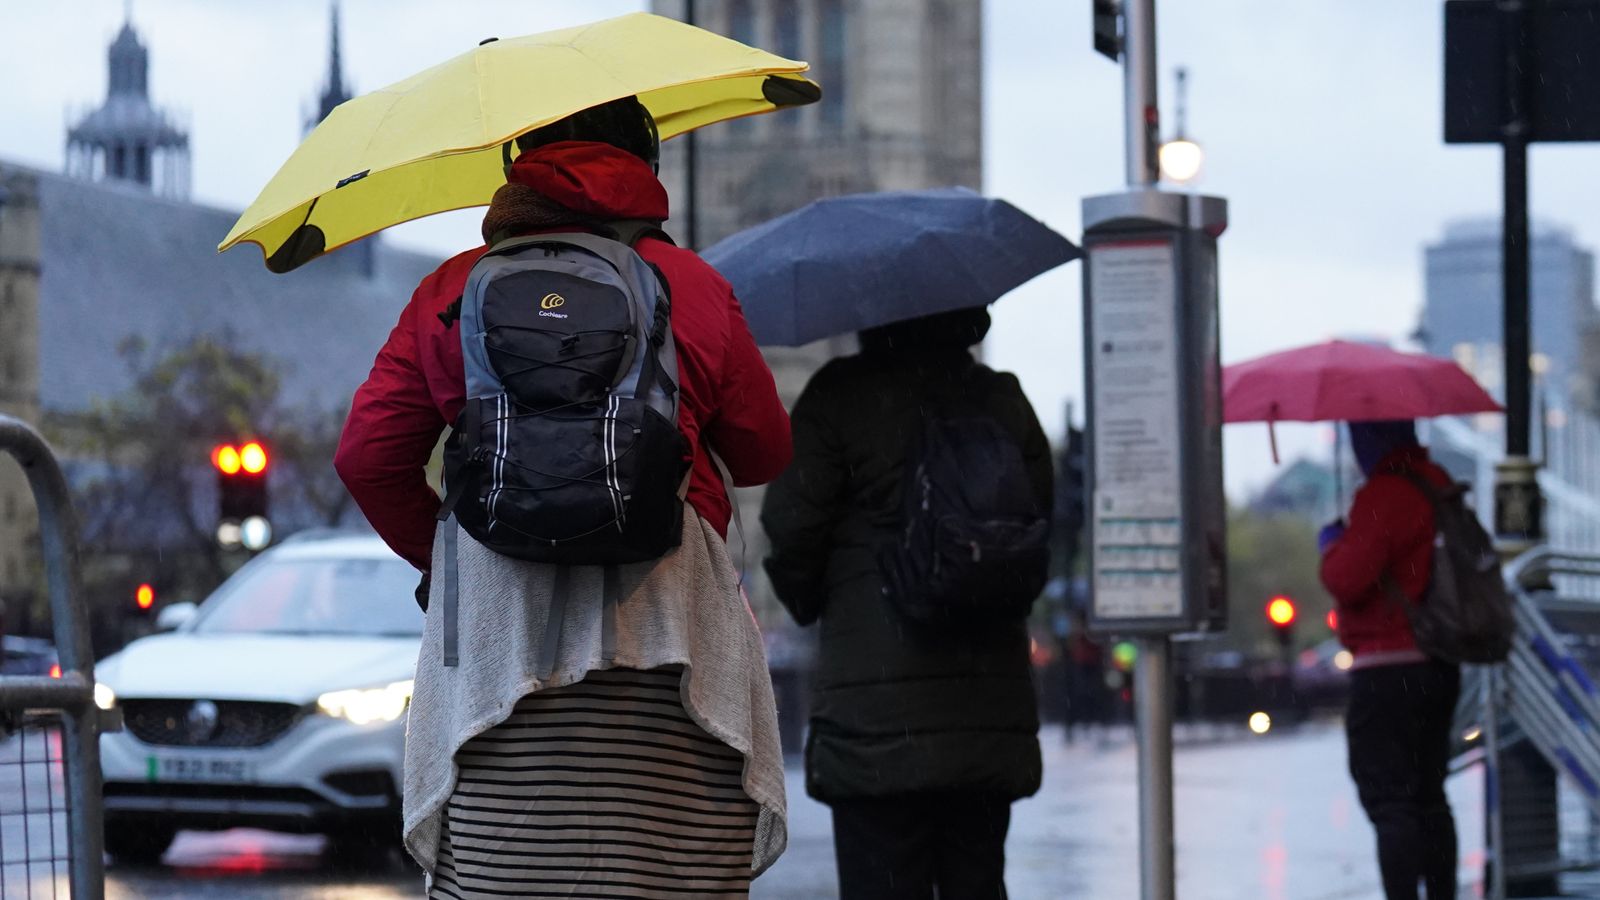 Ice, heavy rain and potential flooding for parts of UK as warning issued for disrupted power supplies